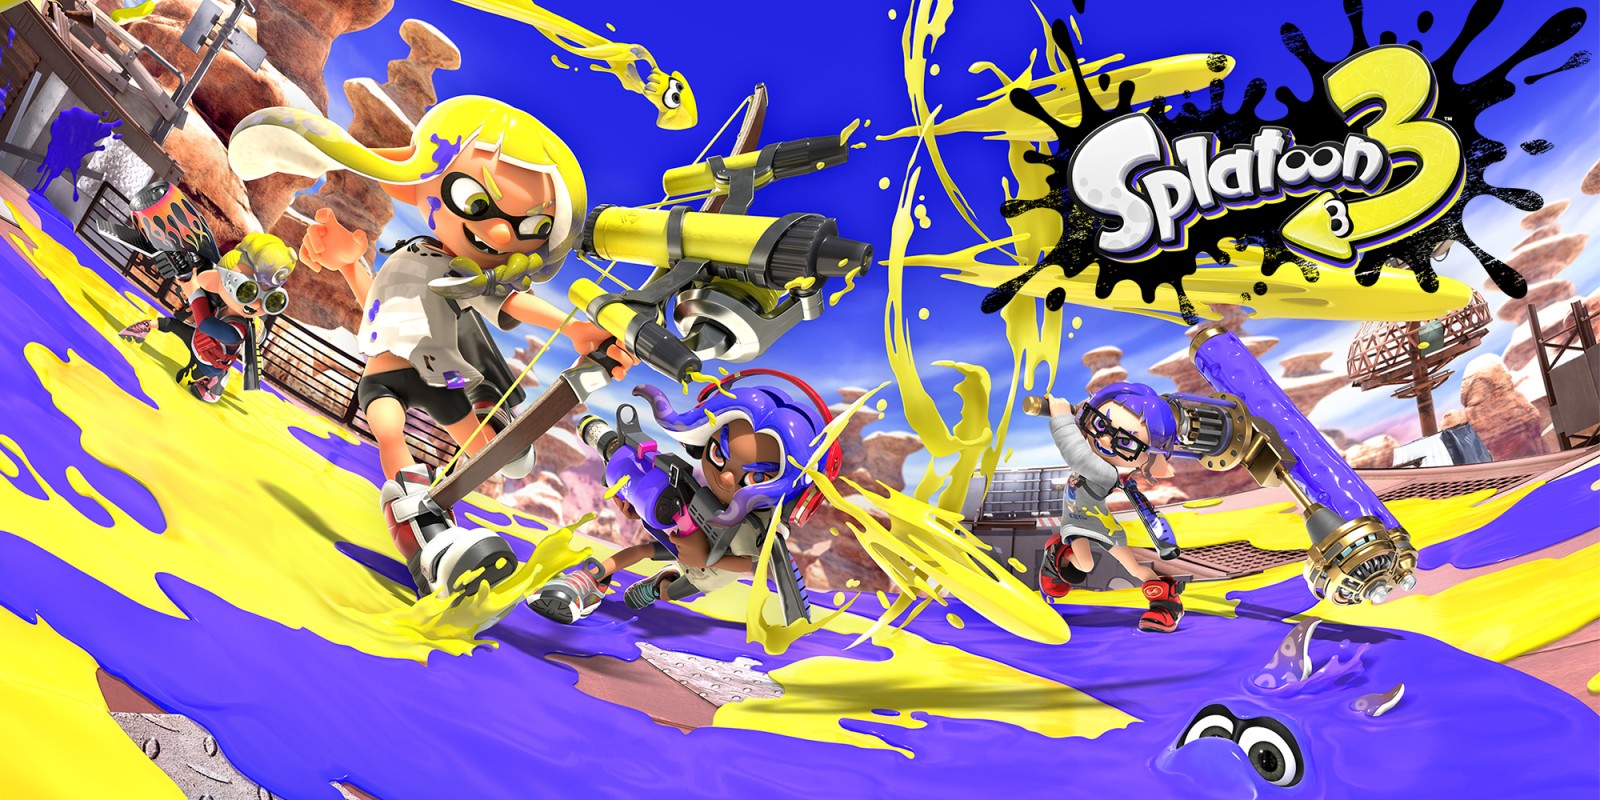 Nintendo Direct about Splatoon 3 will be held on August 10